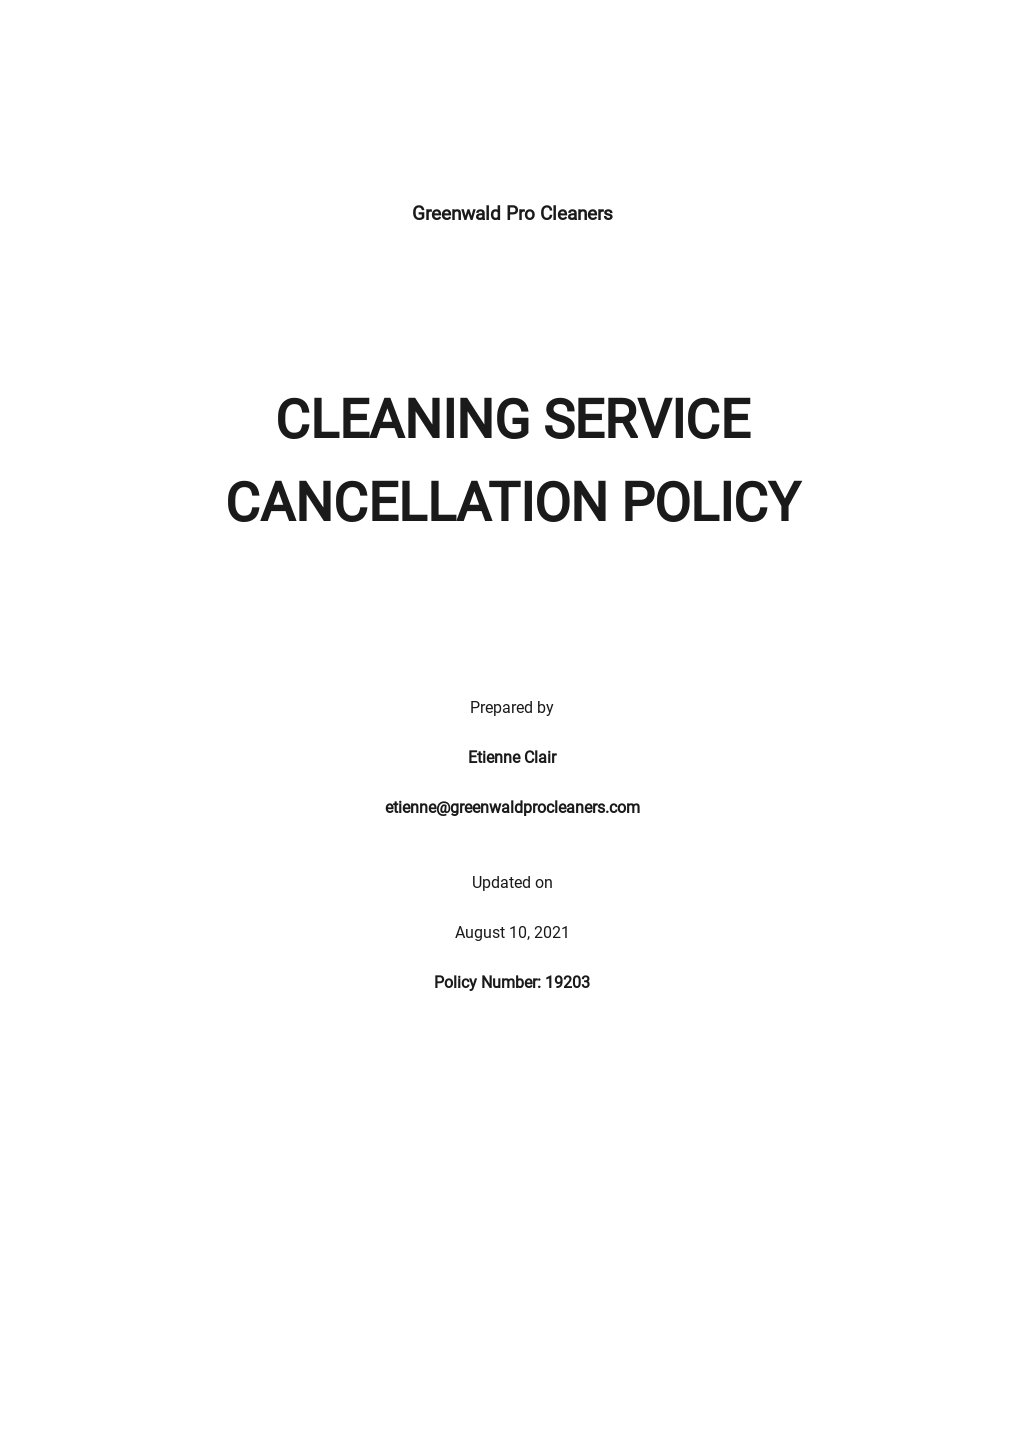 Free Cleaning Service Cancellation Policy Template.jpe